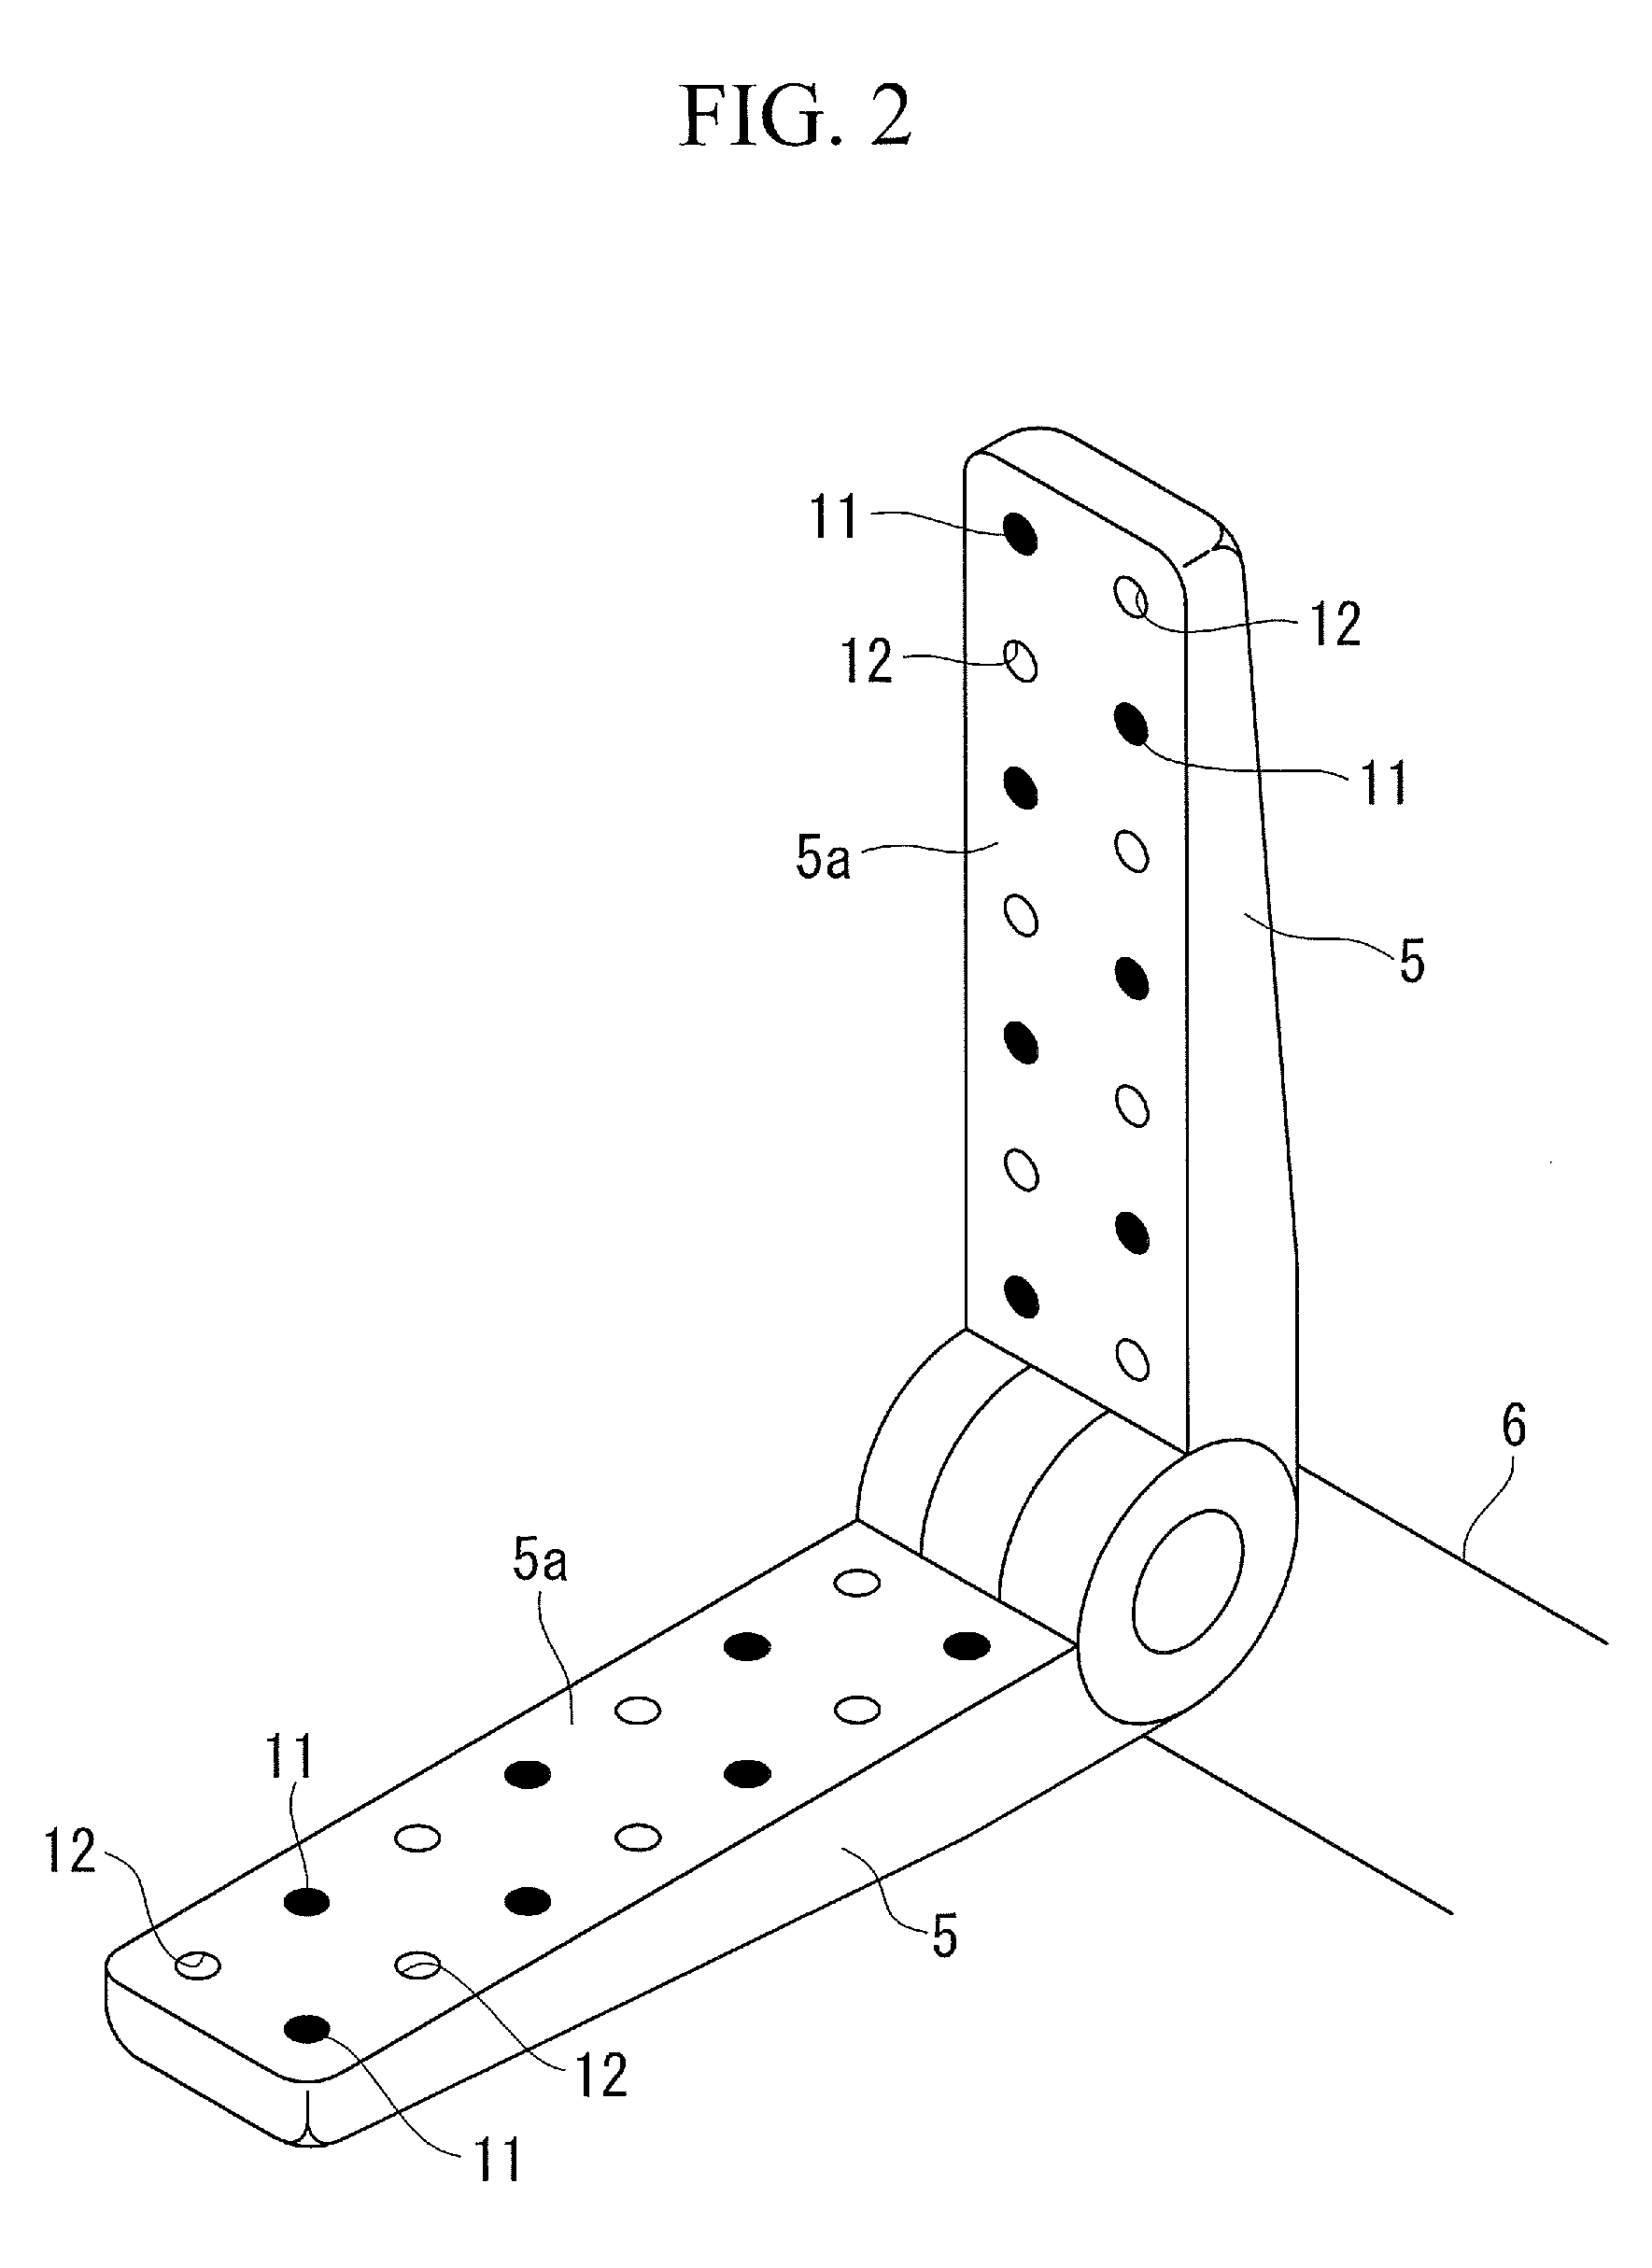 Biological-tissue joining apparatus